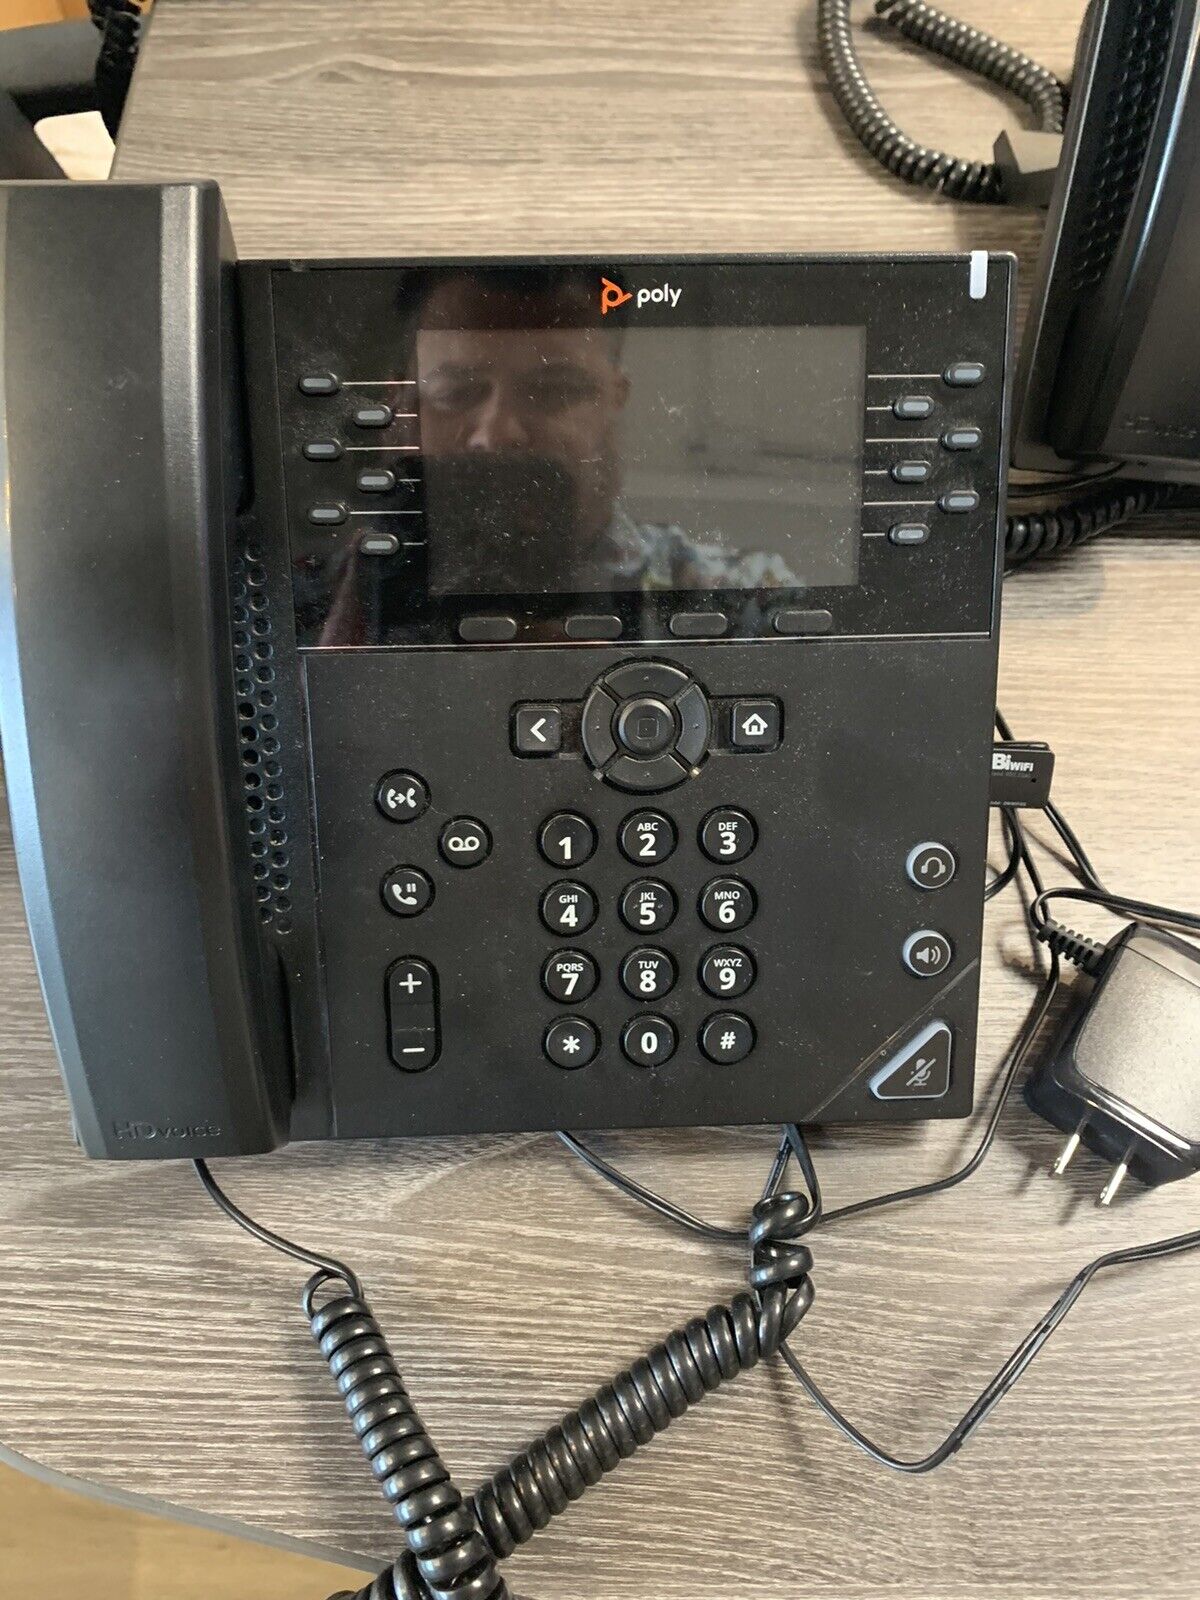 Polycom VVX 450 12 Lines Business IP Phone with wifi dongle complete 